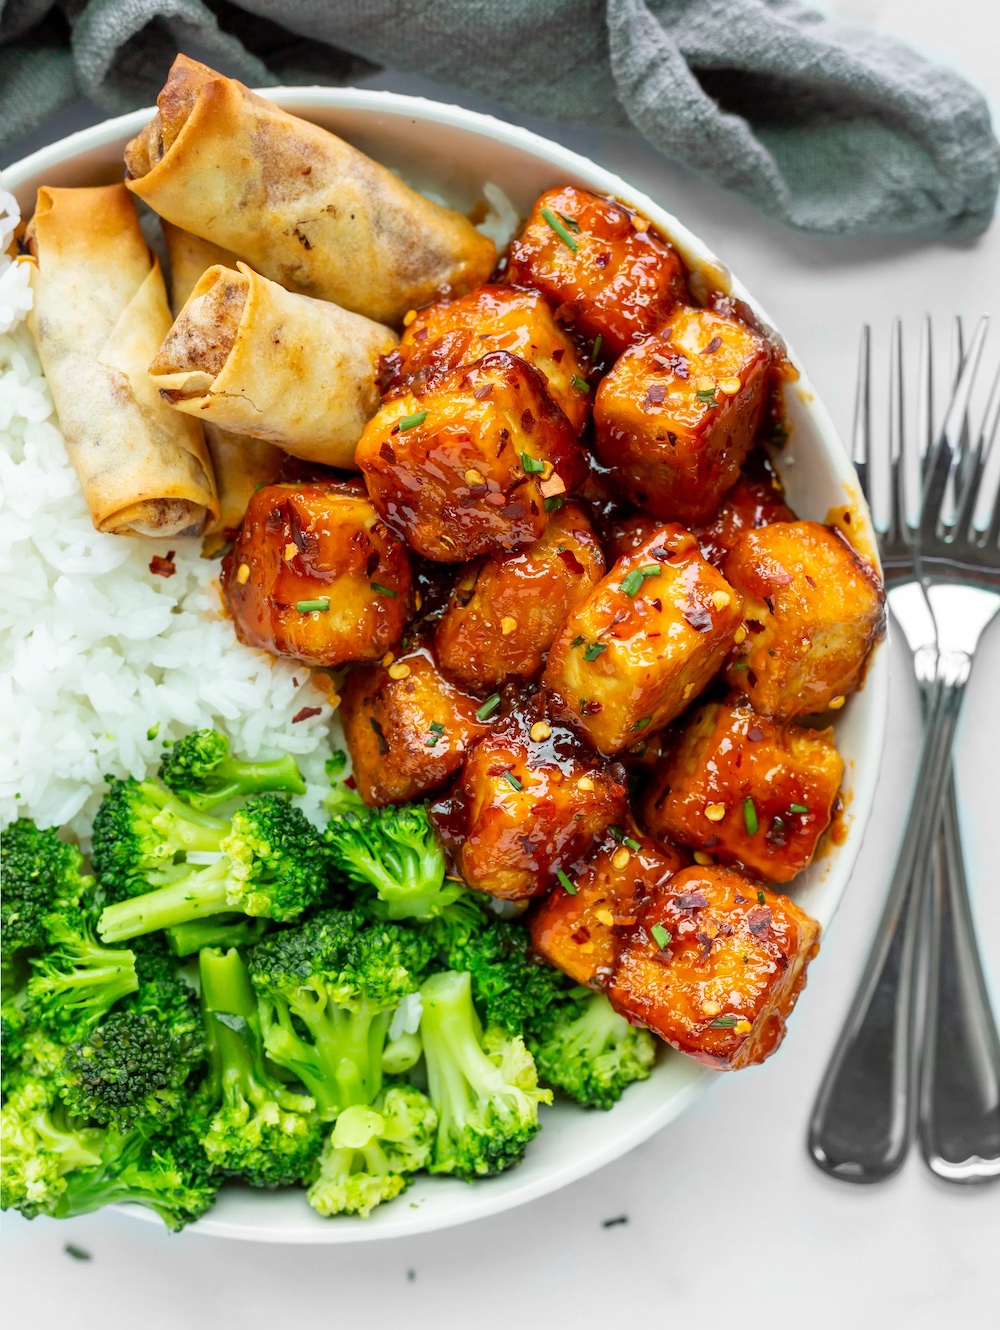 Weekly meal plan ideas: Firecracker Tofu for Meatless Monday, at Vegan Travel Eats